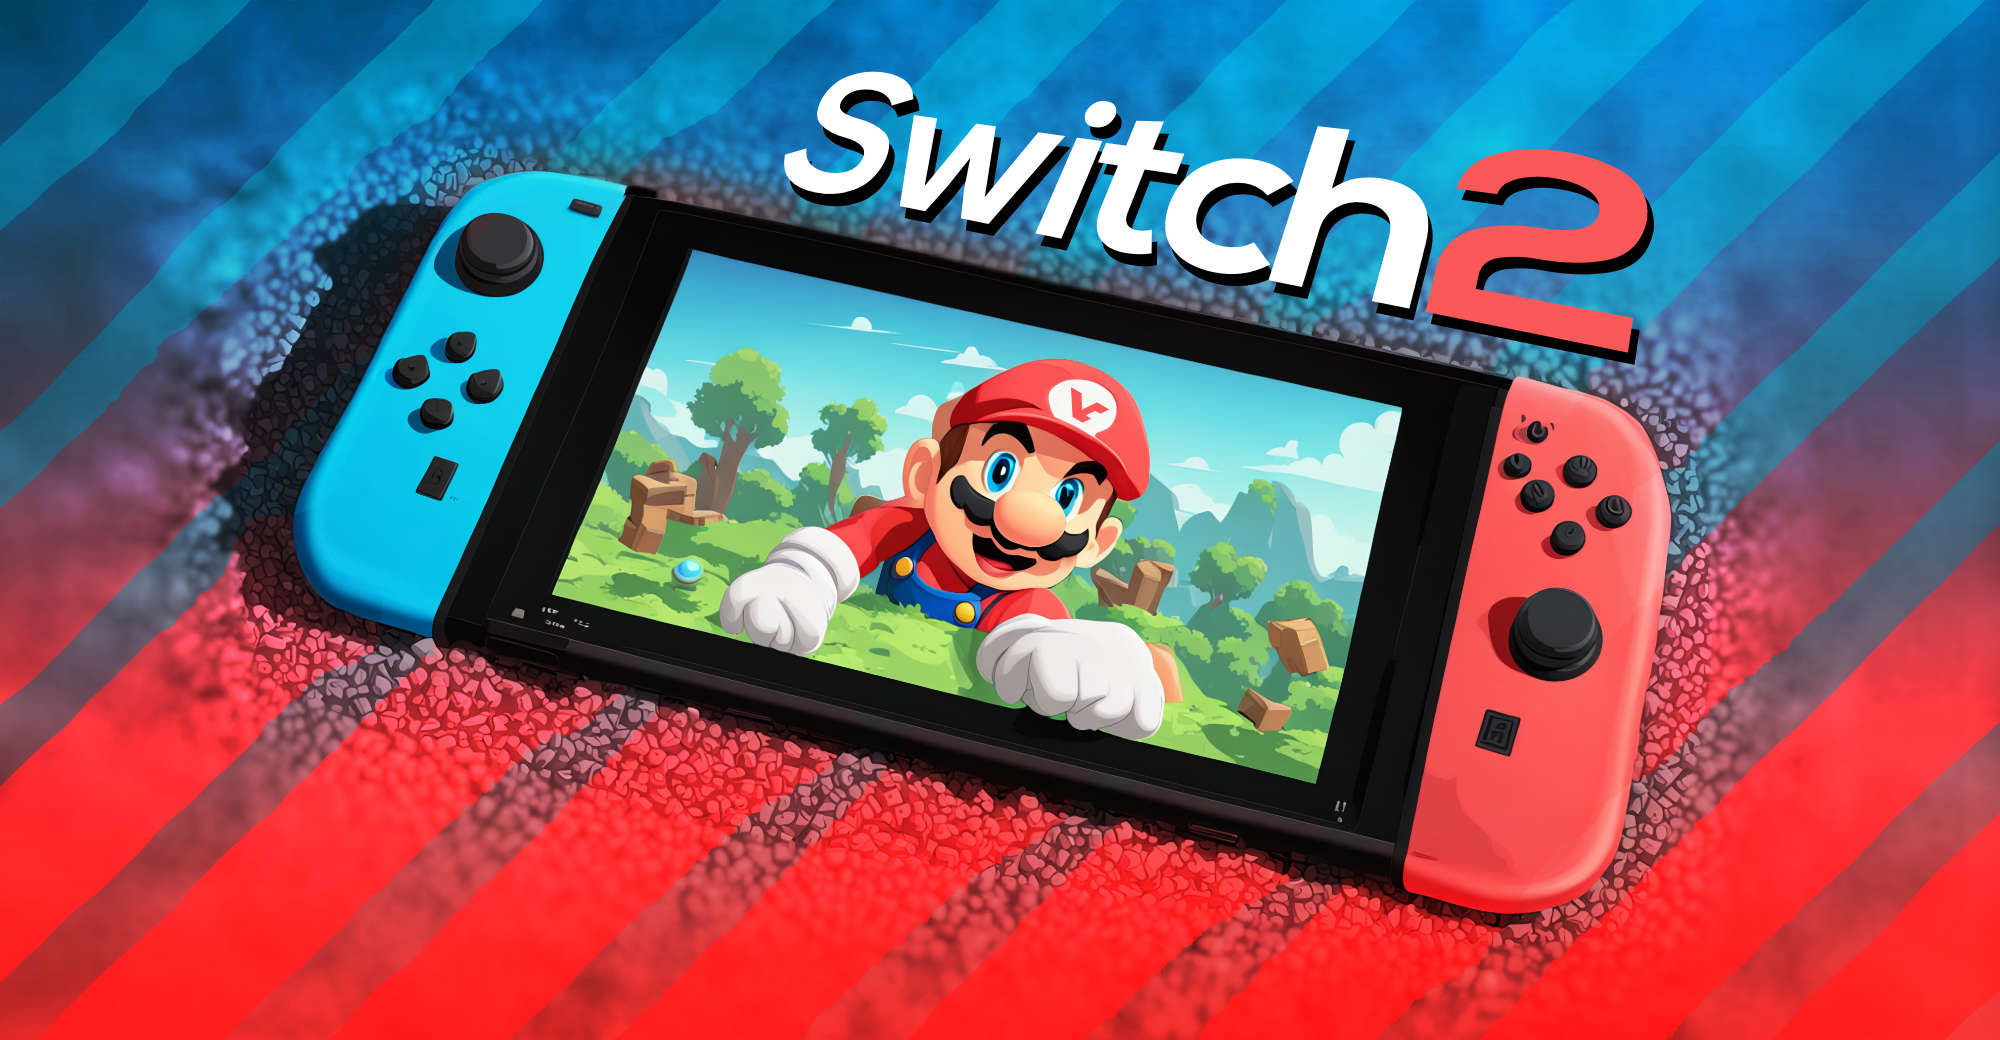 Nintendo Switch 2 within this fiscal year The President of Nintendo confirms the new Switch will be announced this (fiscal) year.  Finally, the company has confirmed that the Switch will get a successor. This comes years after rumors about potential updates to the Switch and Switch OLED handheld systems that were released years ago. The […]